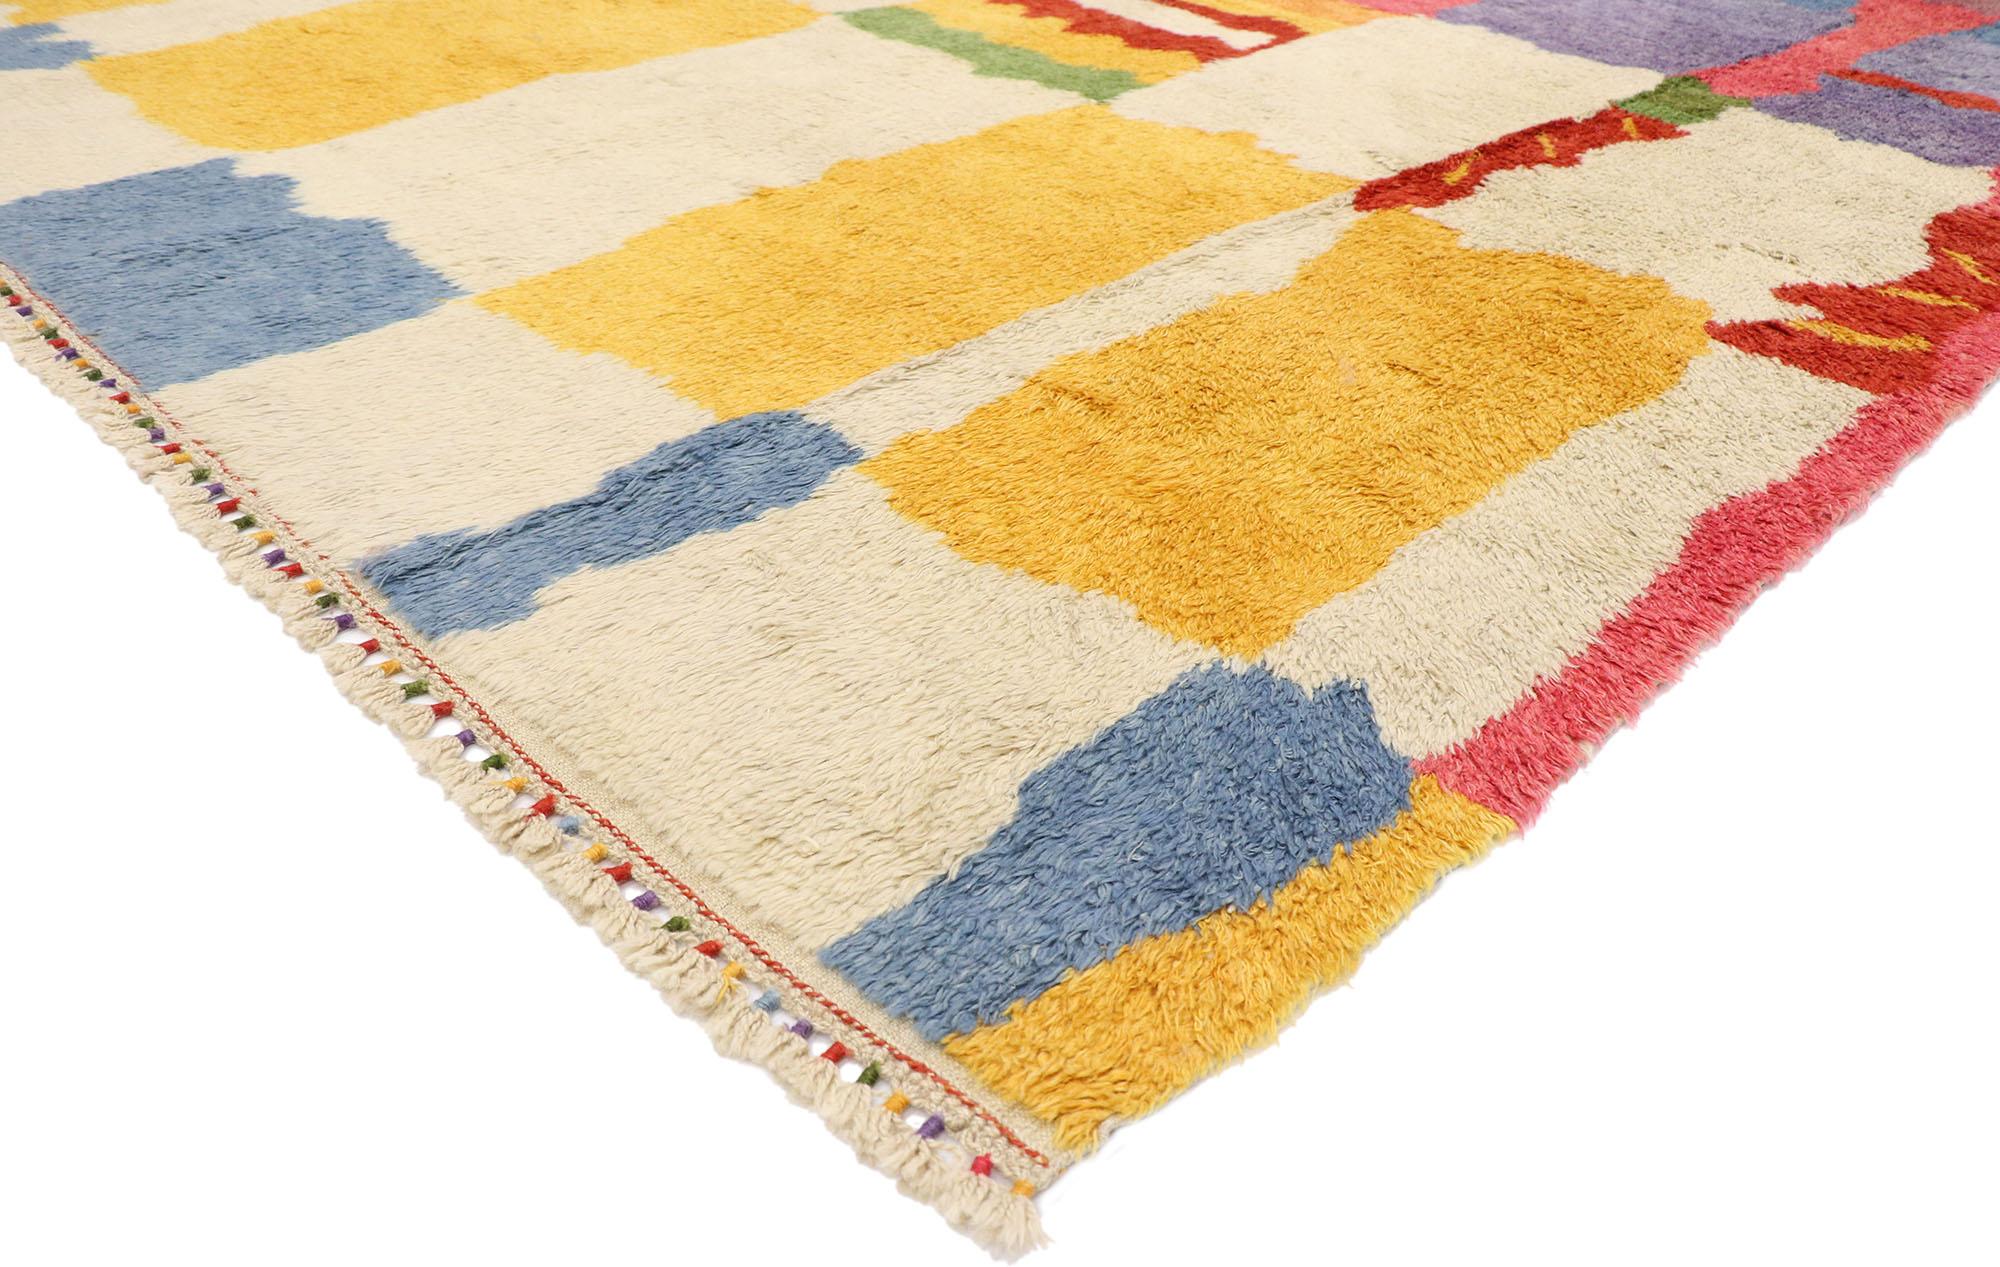 51870, new colorful contemporary Tulu Shag rug Inspired by Hans Hofmann and Karl Benjamin. This hand knotted wool contemporary Tulu shag area rug with Postmodern Cubism Bauhaus style features hard edges, asymmetrical lines, and ambiguous organic